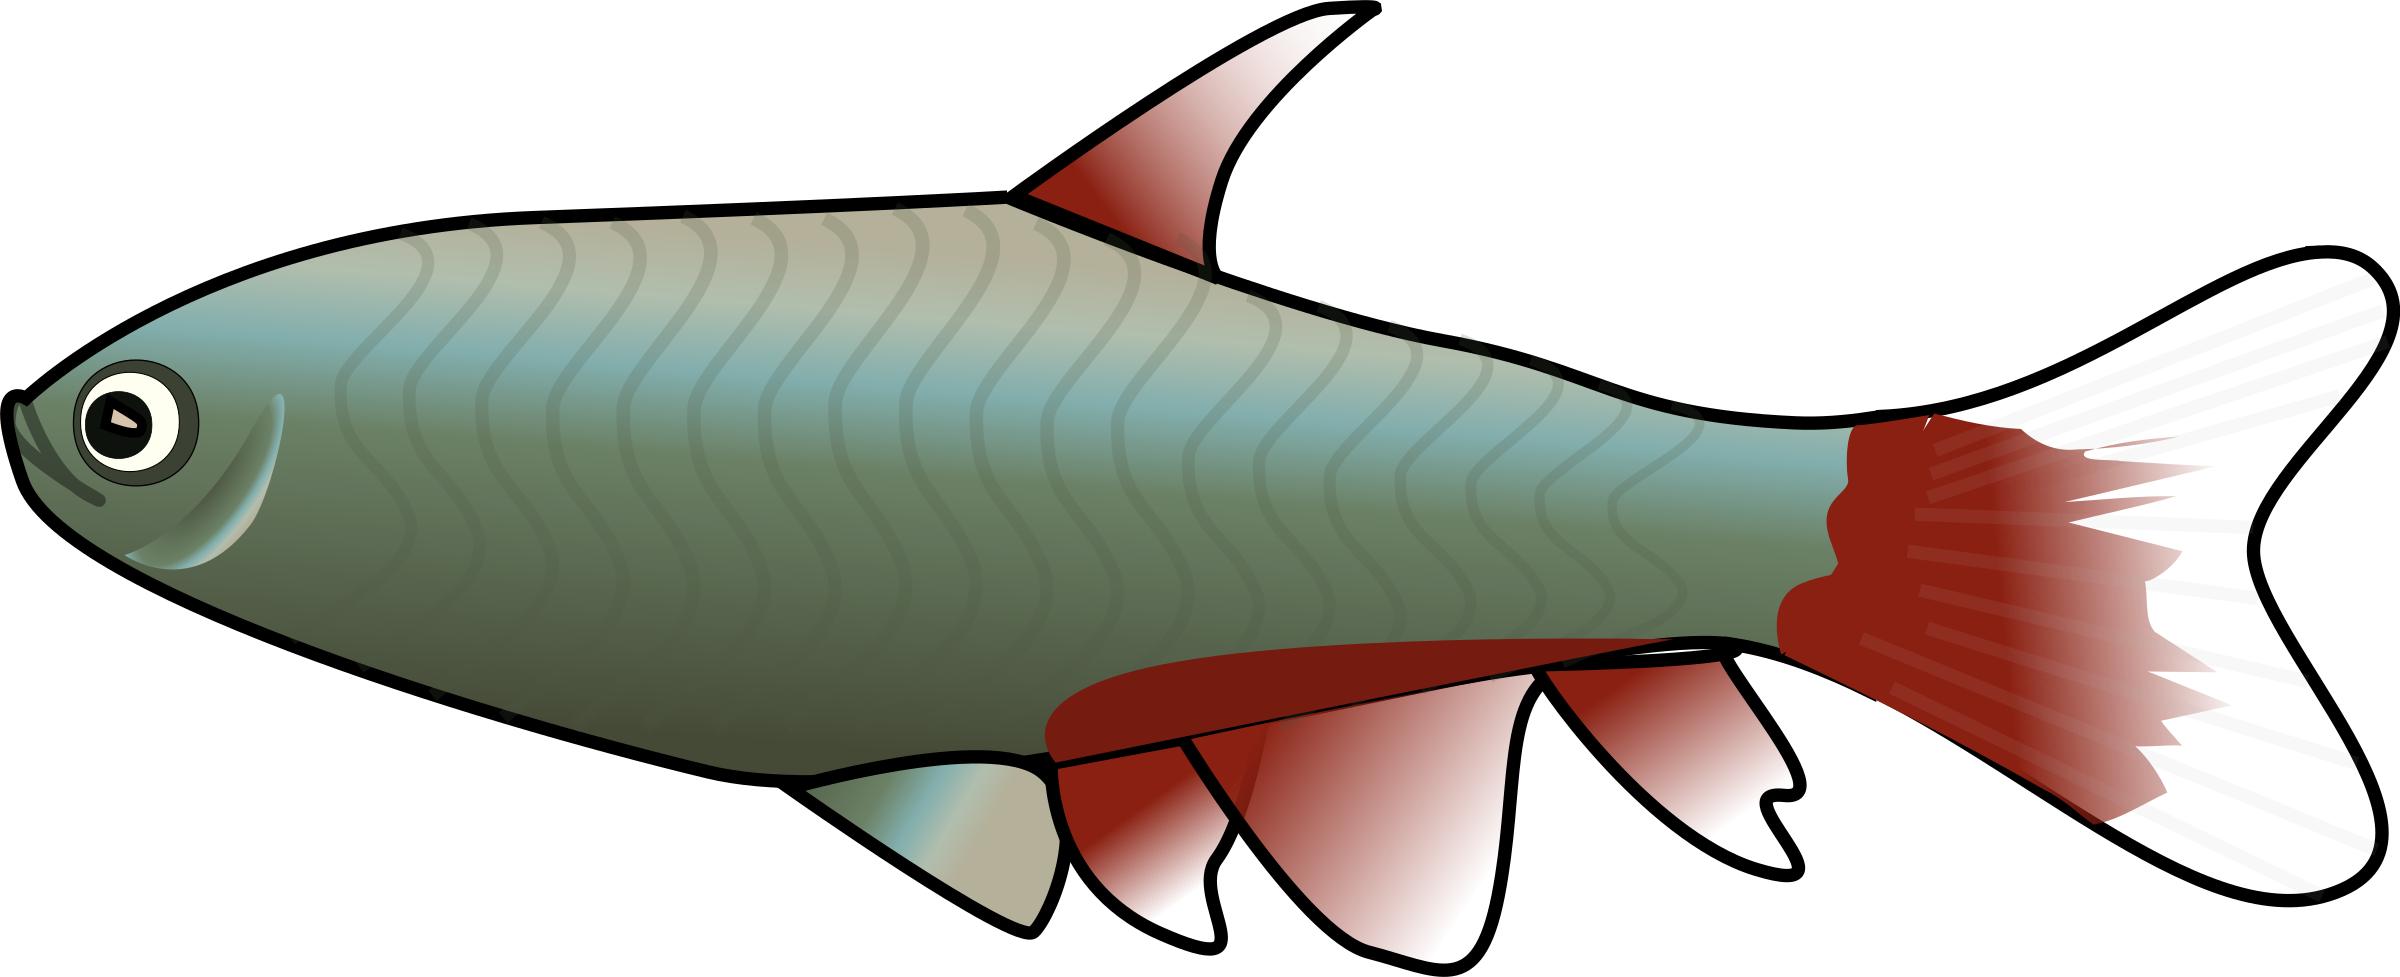 BloodFin Tetra png